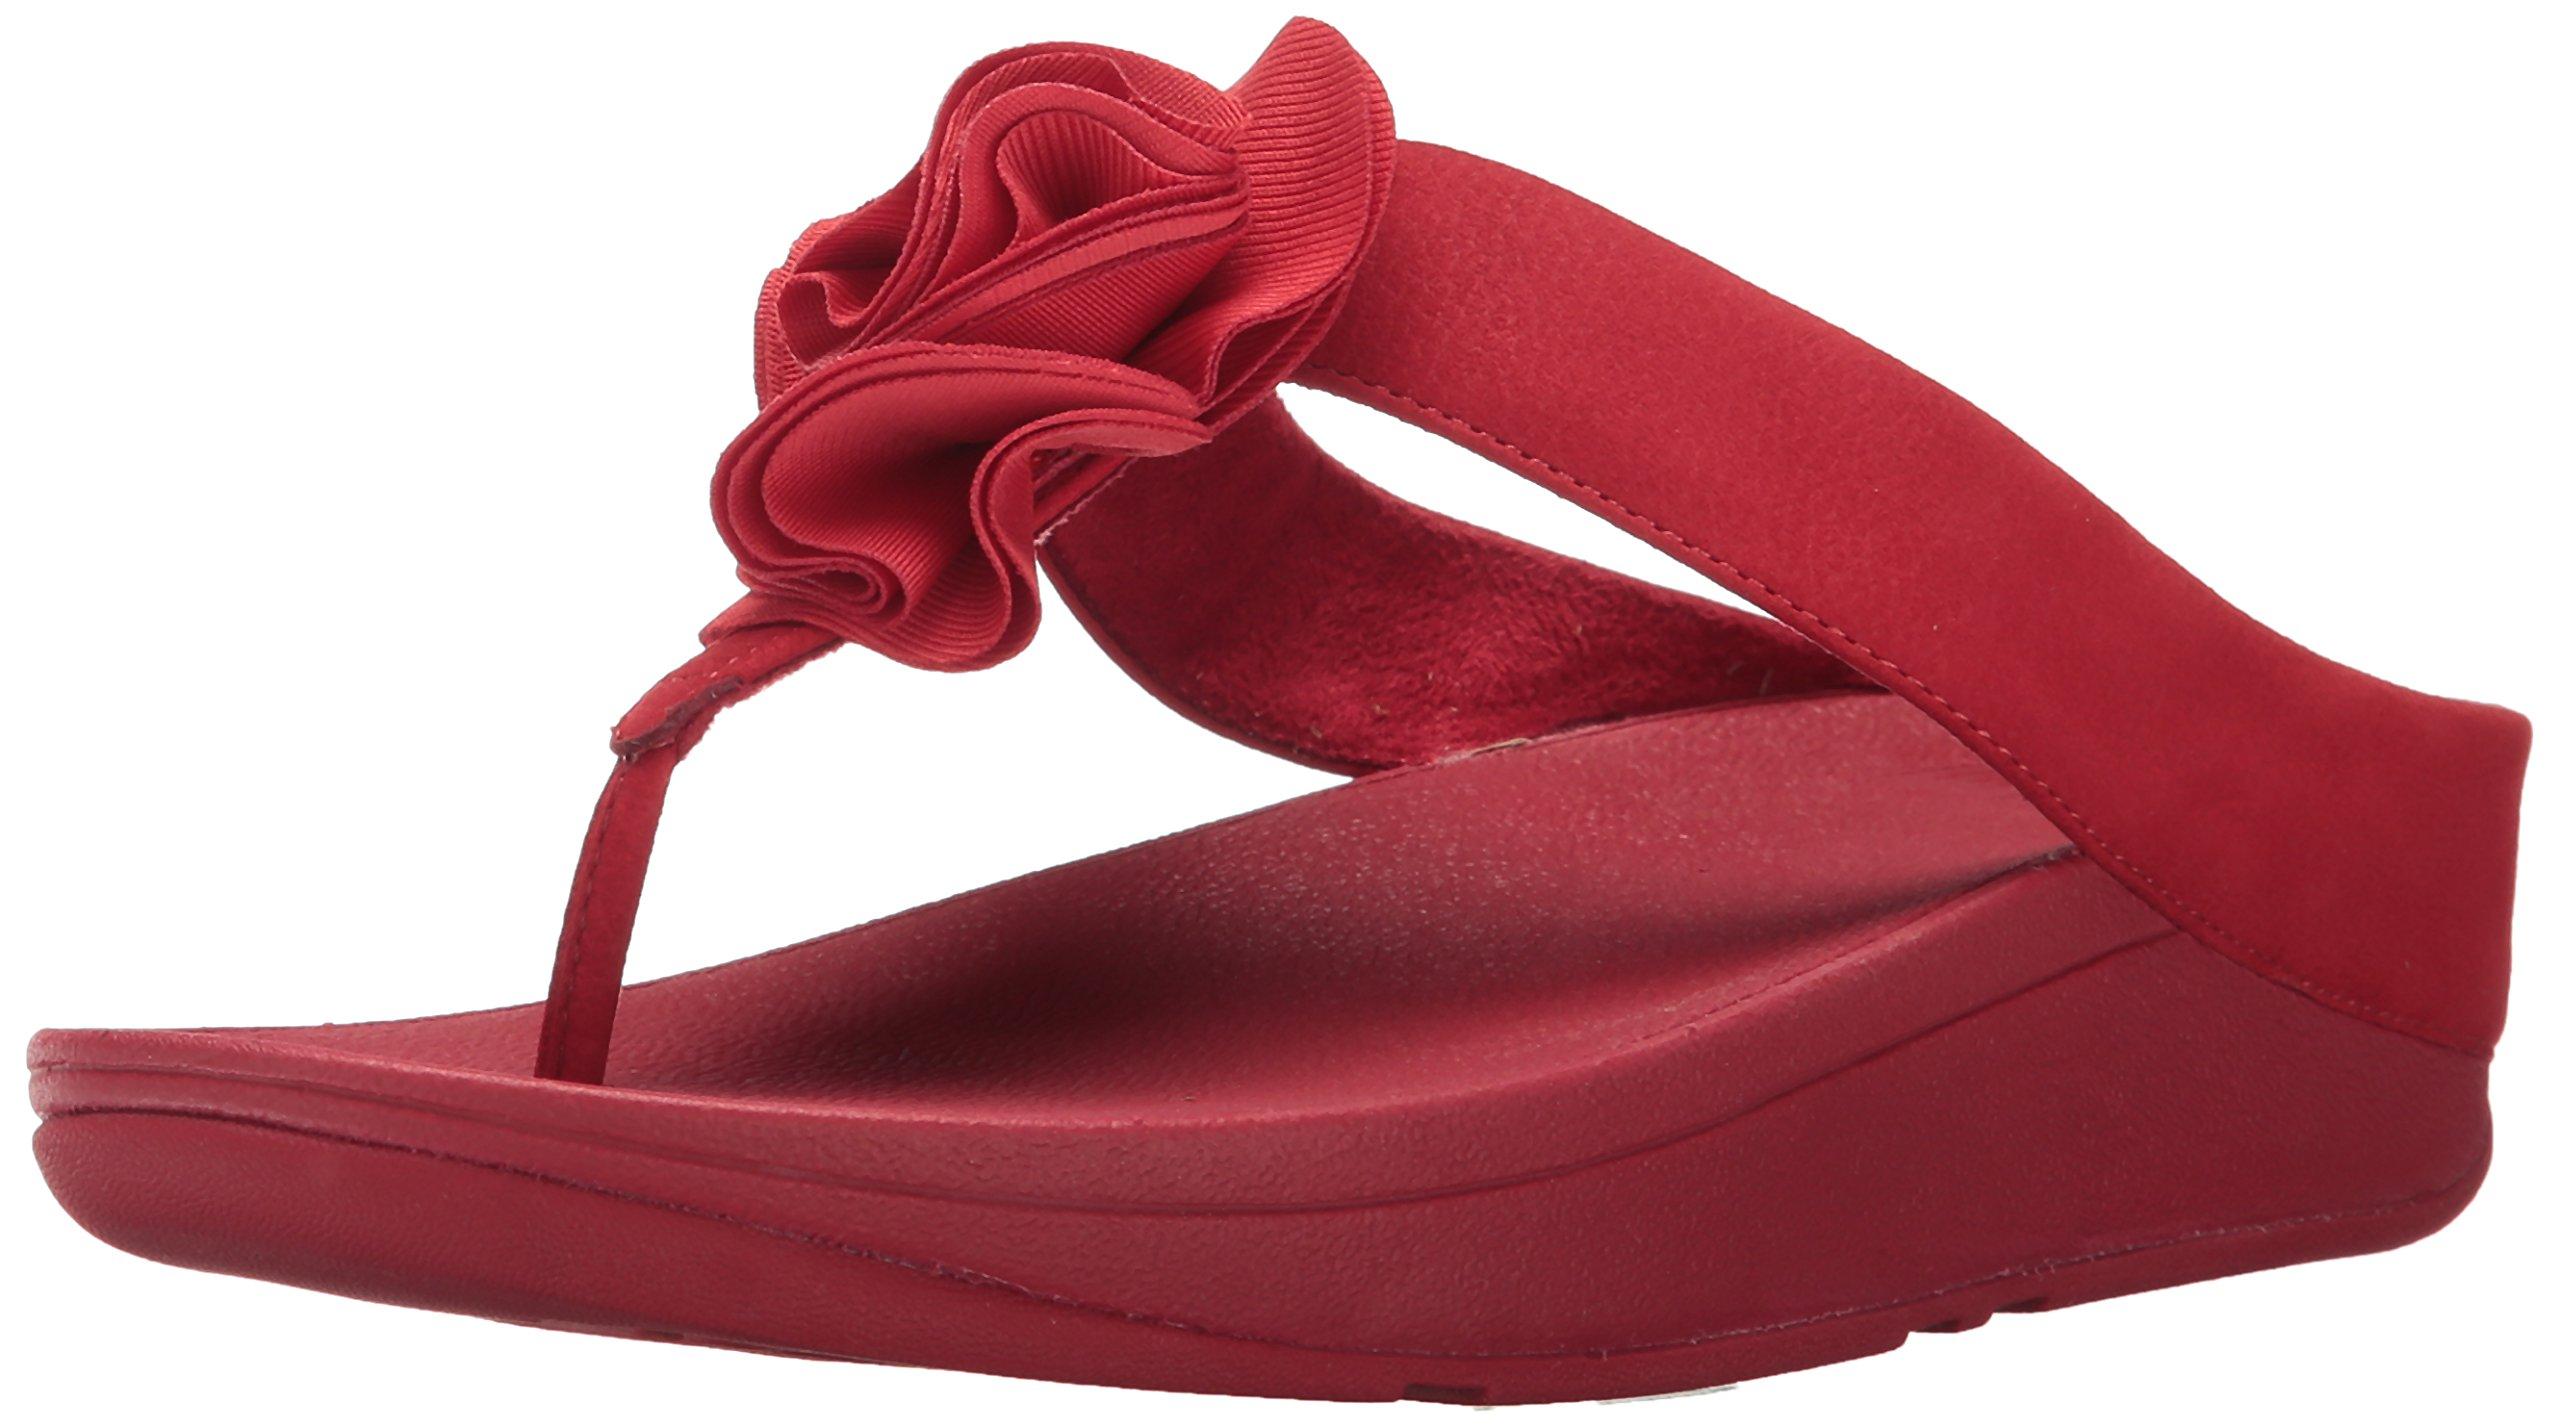 Fitflop Leather Florrie Toe-thong Sandal in Red - Lyst